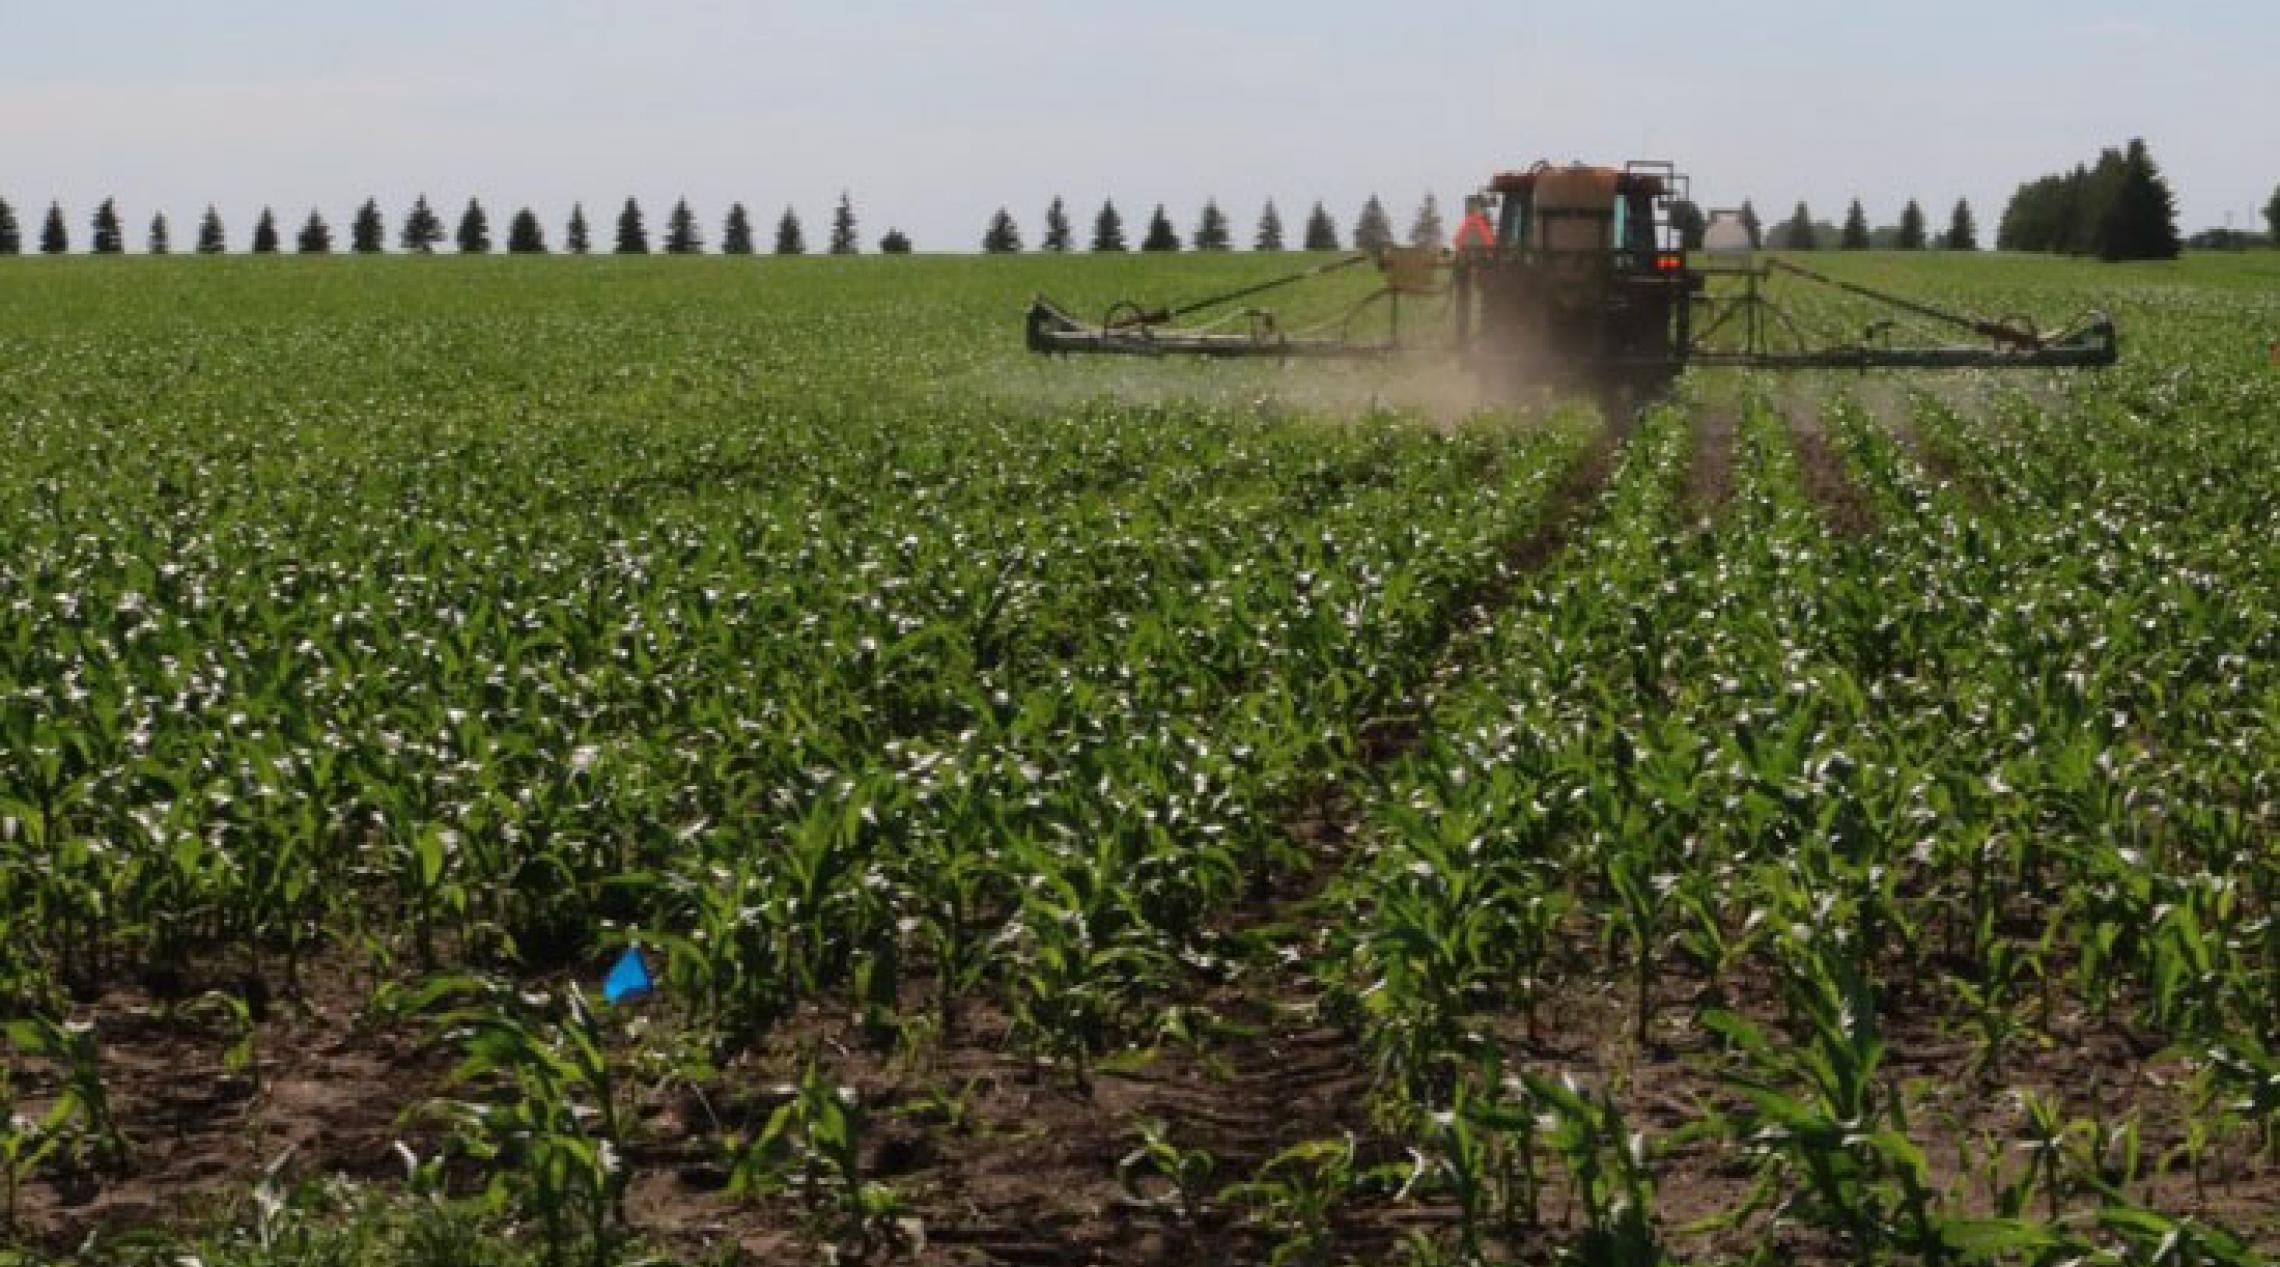 tractor spraying herbicide in a field